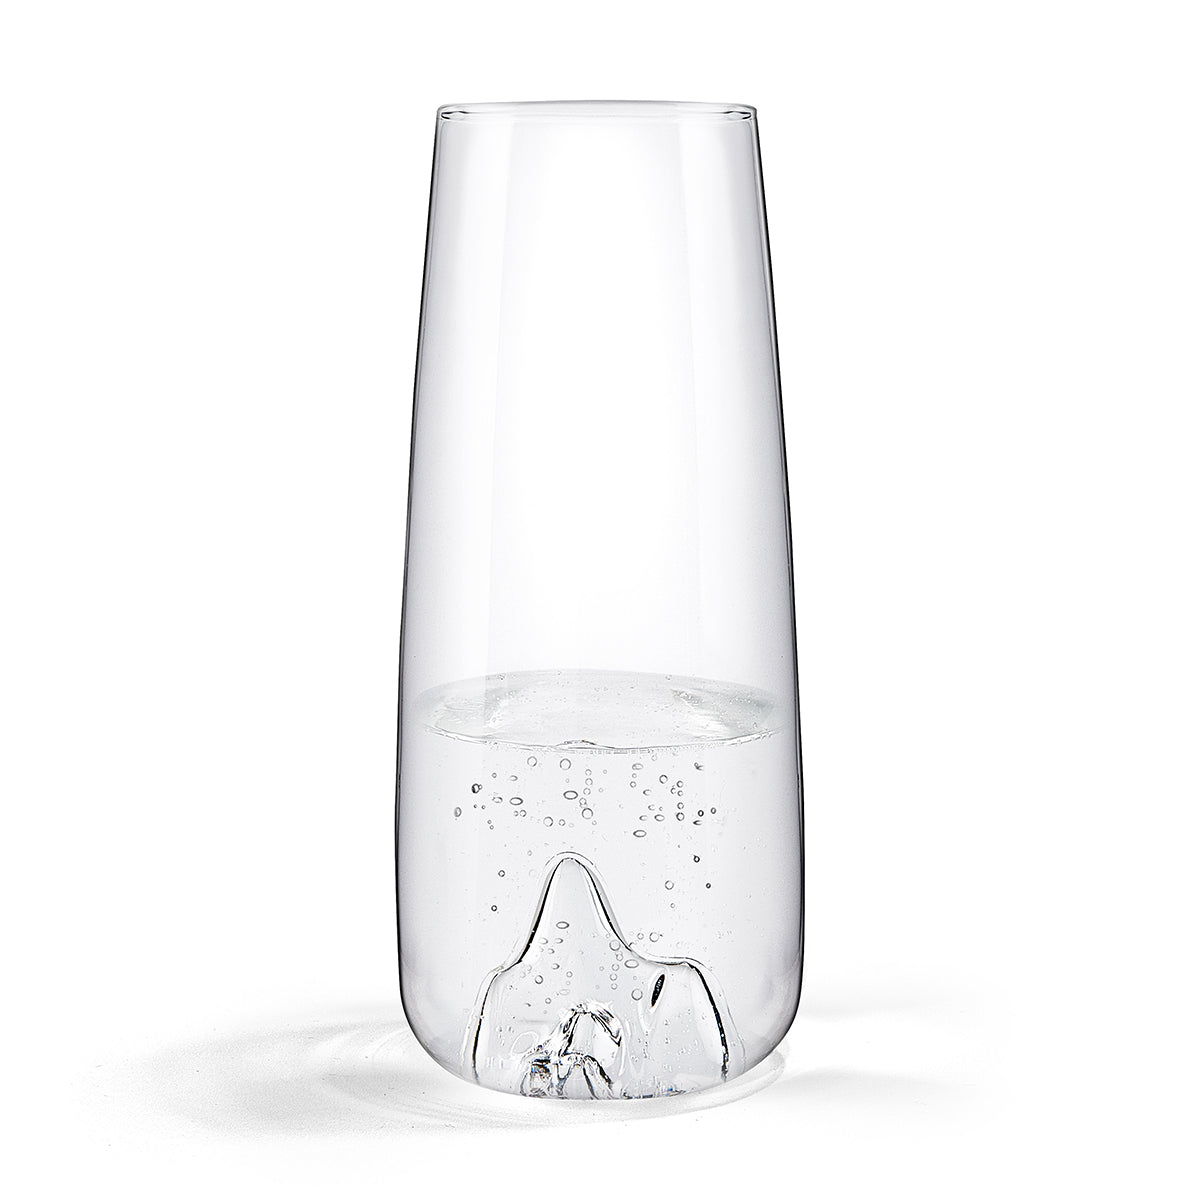 Image of a glass carafe with the shape of a mountain peak indented into its base. The carafe is filled with sparling water. Set against a white background.